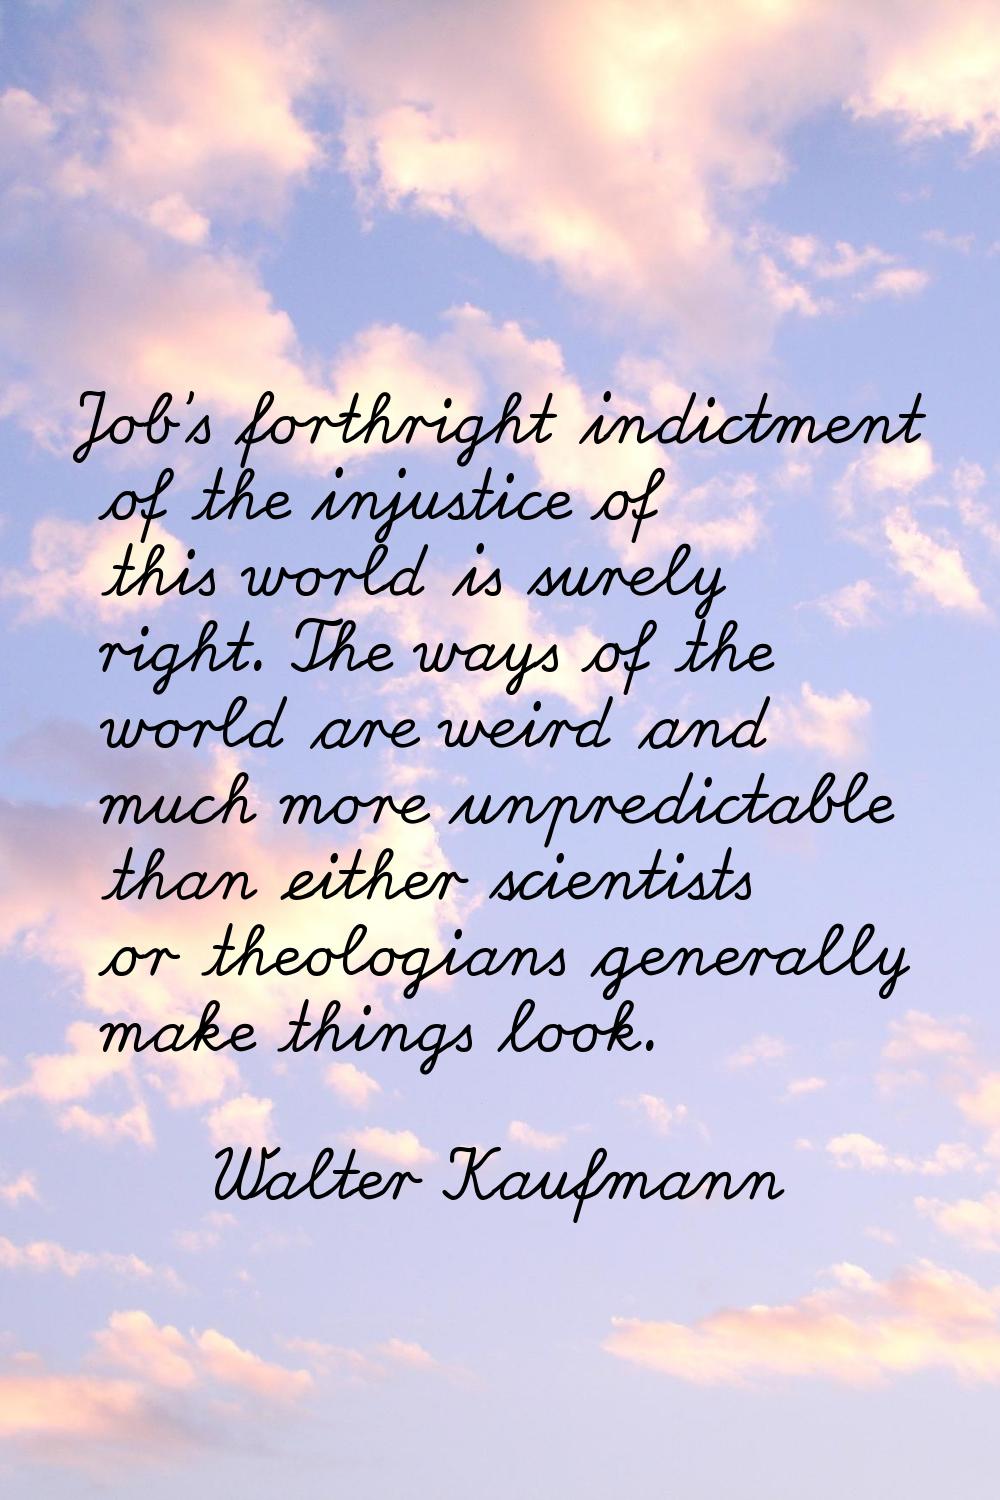 Job's forthright indictment of the injustice of this world is surely right. The ways of the world a